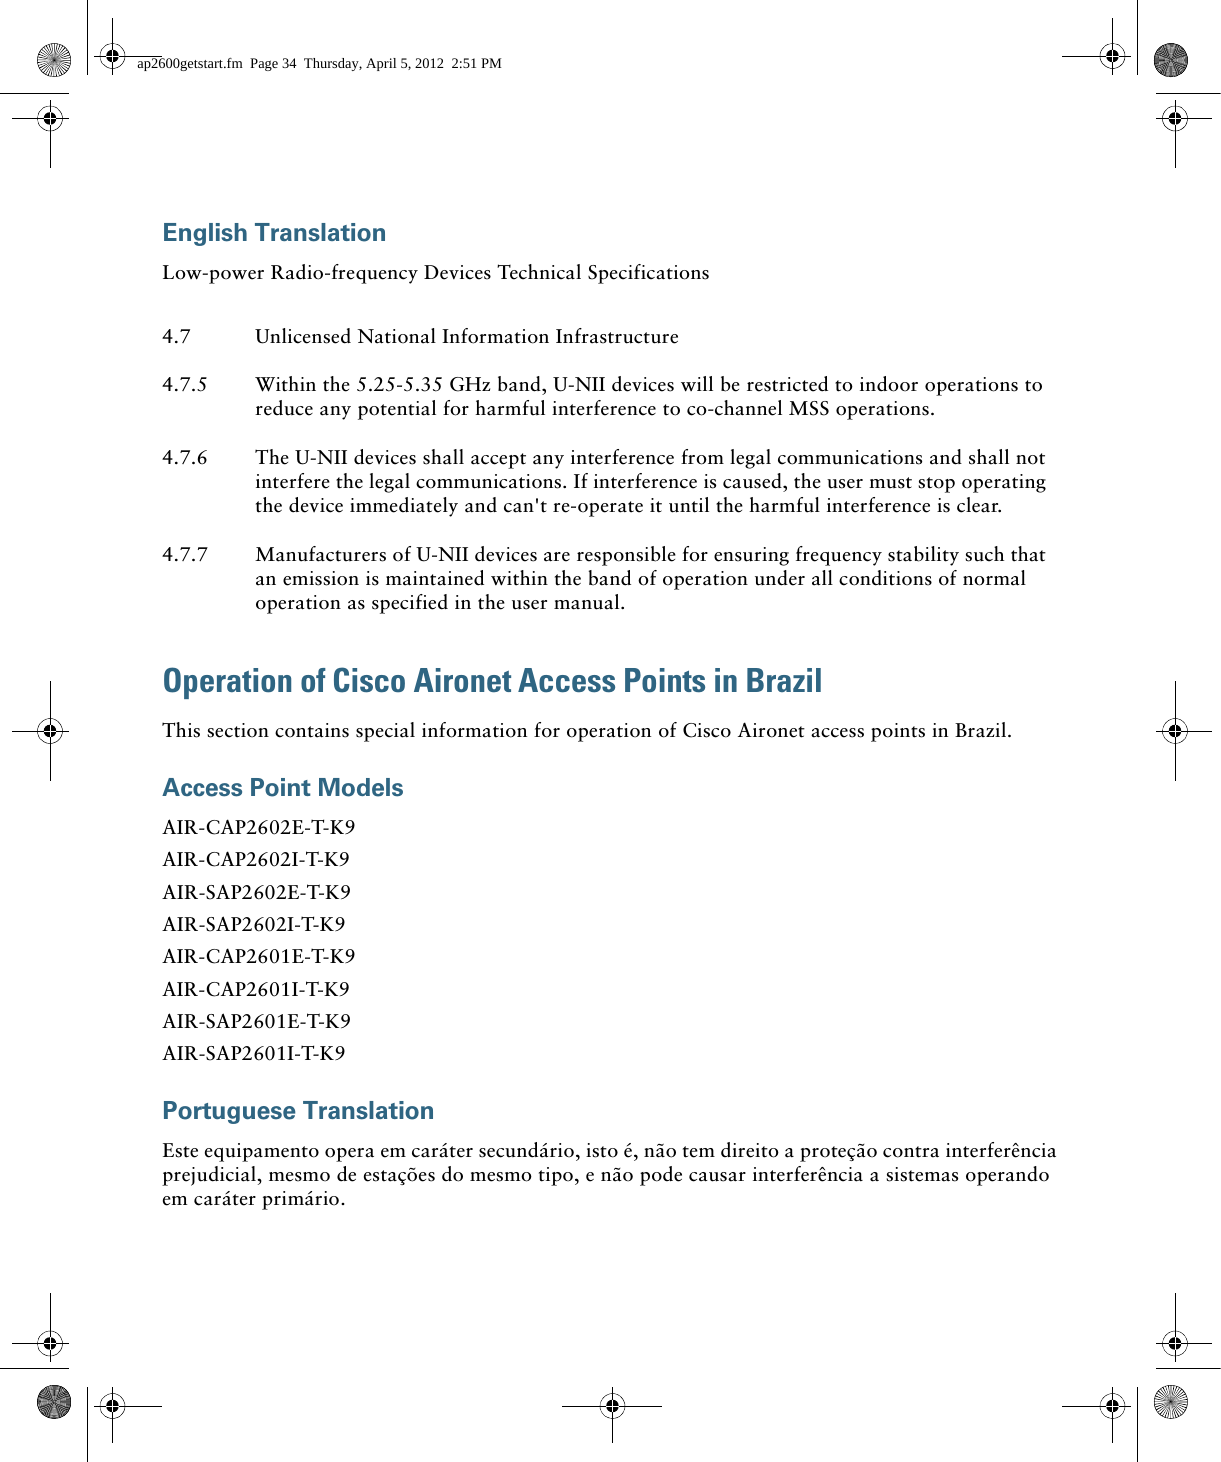  English TranslationLow-power Radio-frequency Devices Technical SpecificationsOperation of Cisco Aironet Access Points in BrazilThis section contains special information for operation of Cisco Aironet access points in Brazil.Access Point ModelsAIR-CAP2602E-T-K9AIR-CAP2602I-T-K9AIR-SAP2602E-T-K9AIR-SAP2602I-T-K9AIR-CAP2601E-T-K9AIR-CAP2601I-T-K9AIR-SAP2601E-T-K9AIR-SAP2601I-T-K9Portuguese TranslationEste equipamento opera em caráter secundário, isto é, não tem direito a proteção contra interferência prejudicial, mesmo de estações do mesmo tipo, e não pode causar interferência a sistemas operando em caráter primário.4.7 Unlicensed National Information Infrastructure4.7.5 Within the 5.25-5.35 GHz band, U-NII devices will be restricted to indoor operations to reduce any potential for harmful interference to co-channel MSS operations.4.7.6 The U-NII devices shall accept any interference from legal communications and shall not interfere the legal communications. If interference is caused, the user must stop operating the device immediately and can&apos;t re-operate it until the harmful interference is clear.4.7.7 Manufacturers of U-NII devices are responsible for ensuring frequency stability such that an emission is maintained within the band of operation under all conditions of normal operation as specified in the user manual.ap2600getstart.fm  Page 34  Thursday, April 5, 2012  2:51 PM